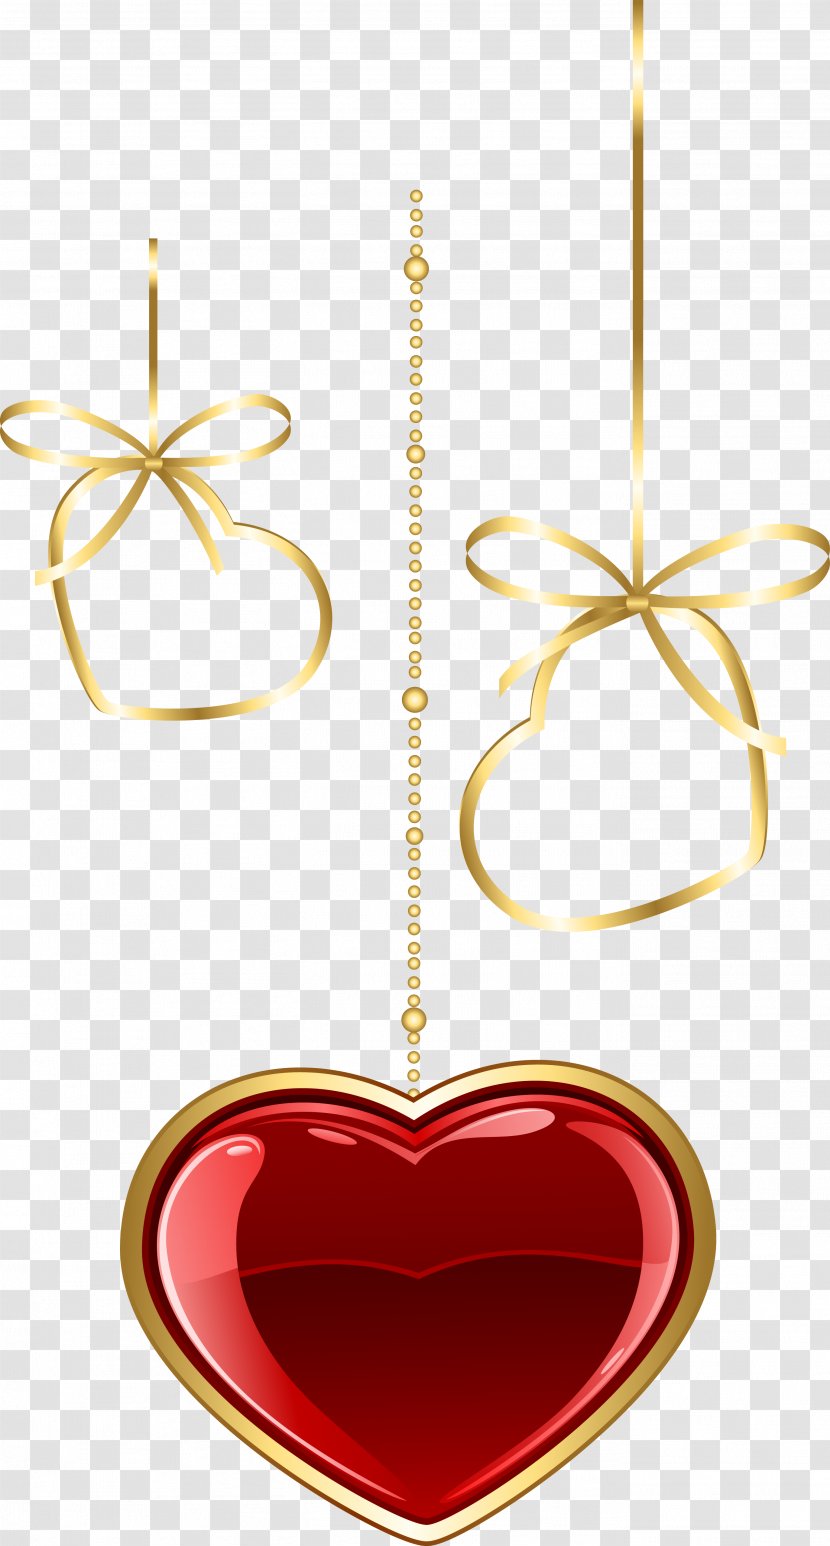 Province Of Monza And Brianza Heart Valentine's Day Computer File - Christmas Ornament - Heart-shaped Decorative Elements Transparent PNG